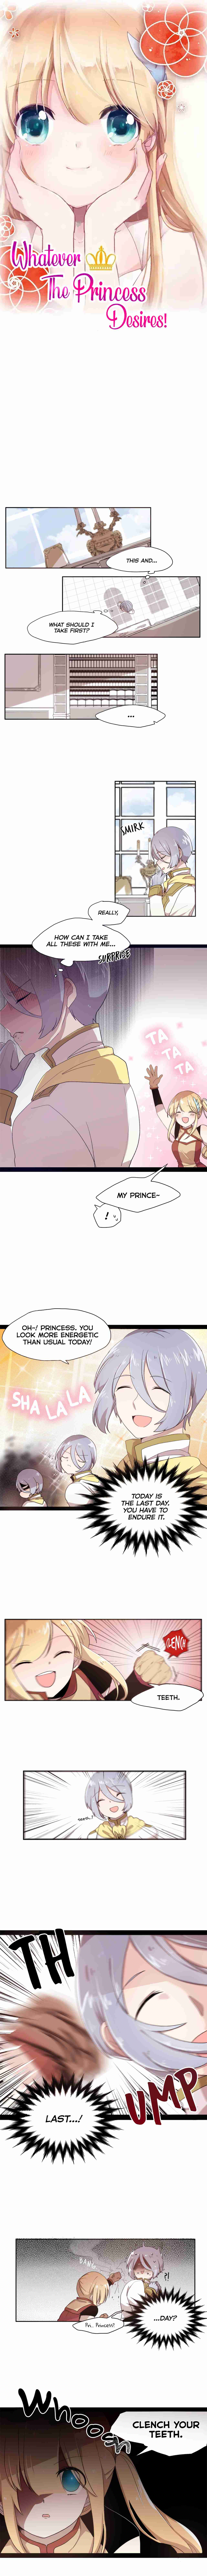 Whatever the Princess Desires! Ch. 5